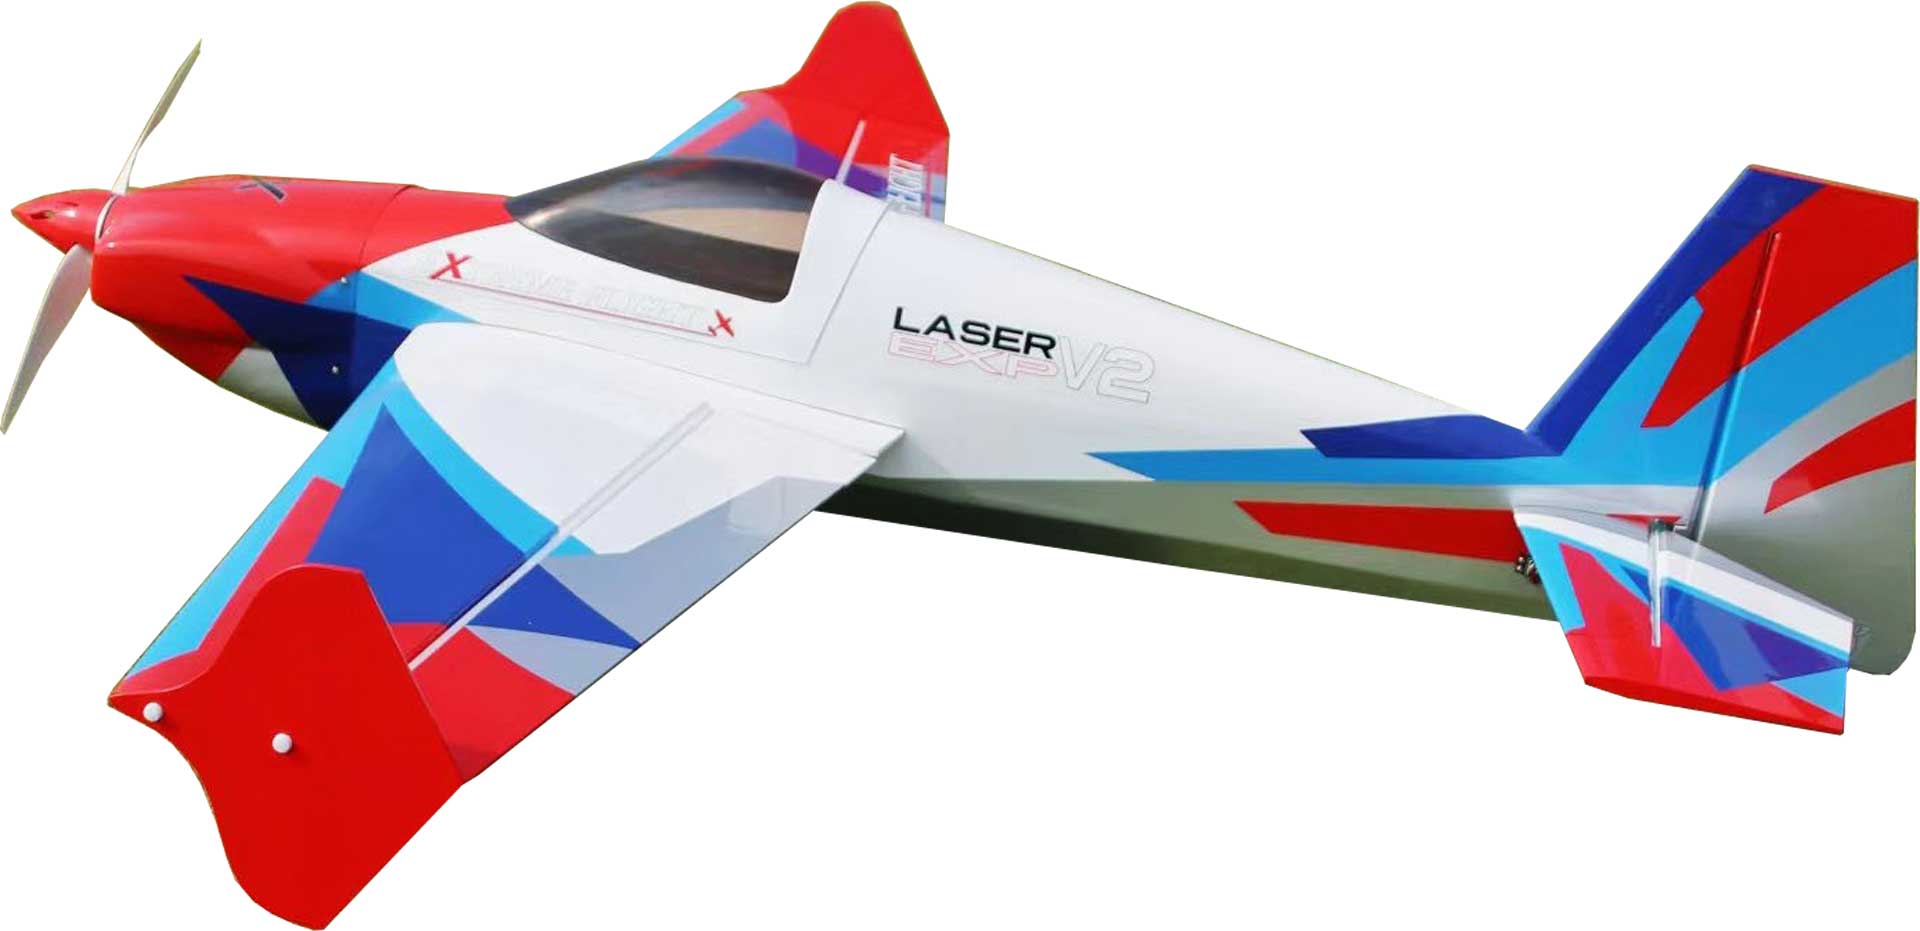 EXTREMEFLIGHT-RC LASER 60" V3 Plus Blue/White/Red RXR Receiver ready ( receiver "ready" )with wing quick-release fastener